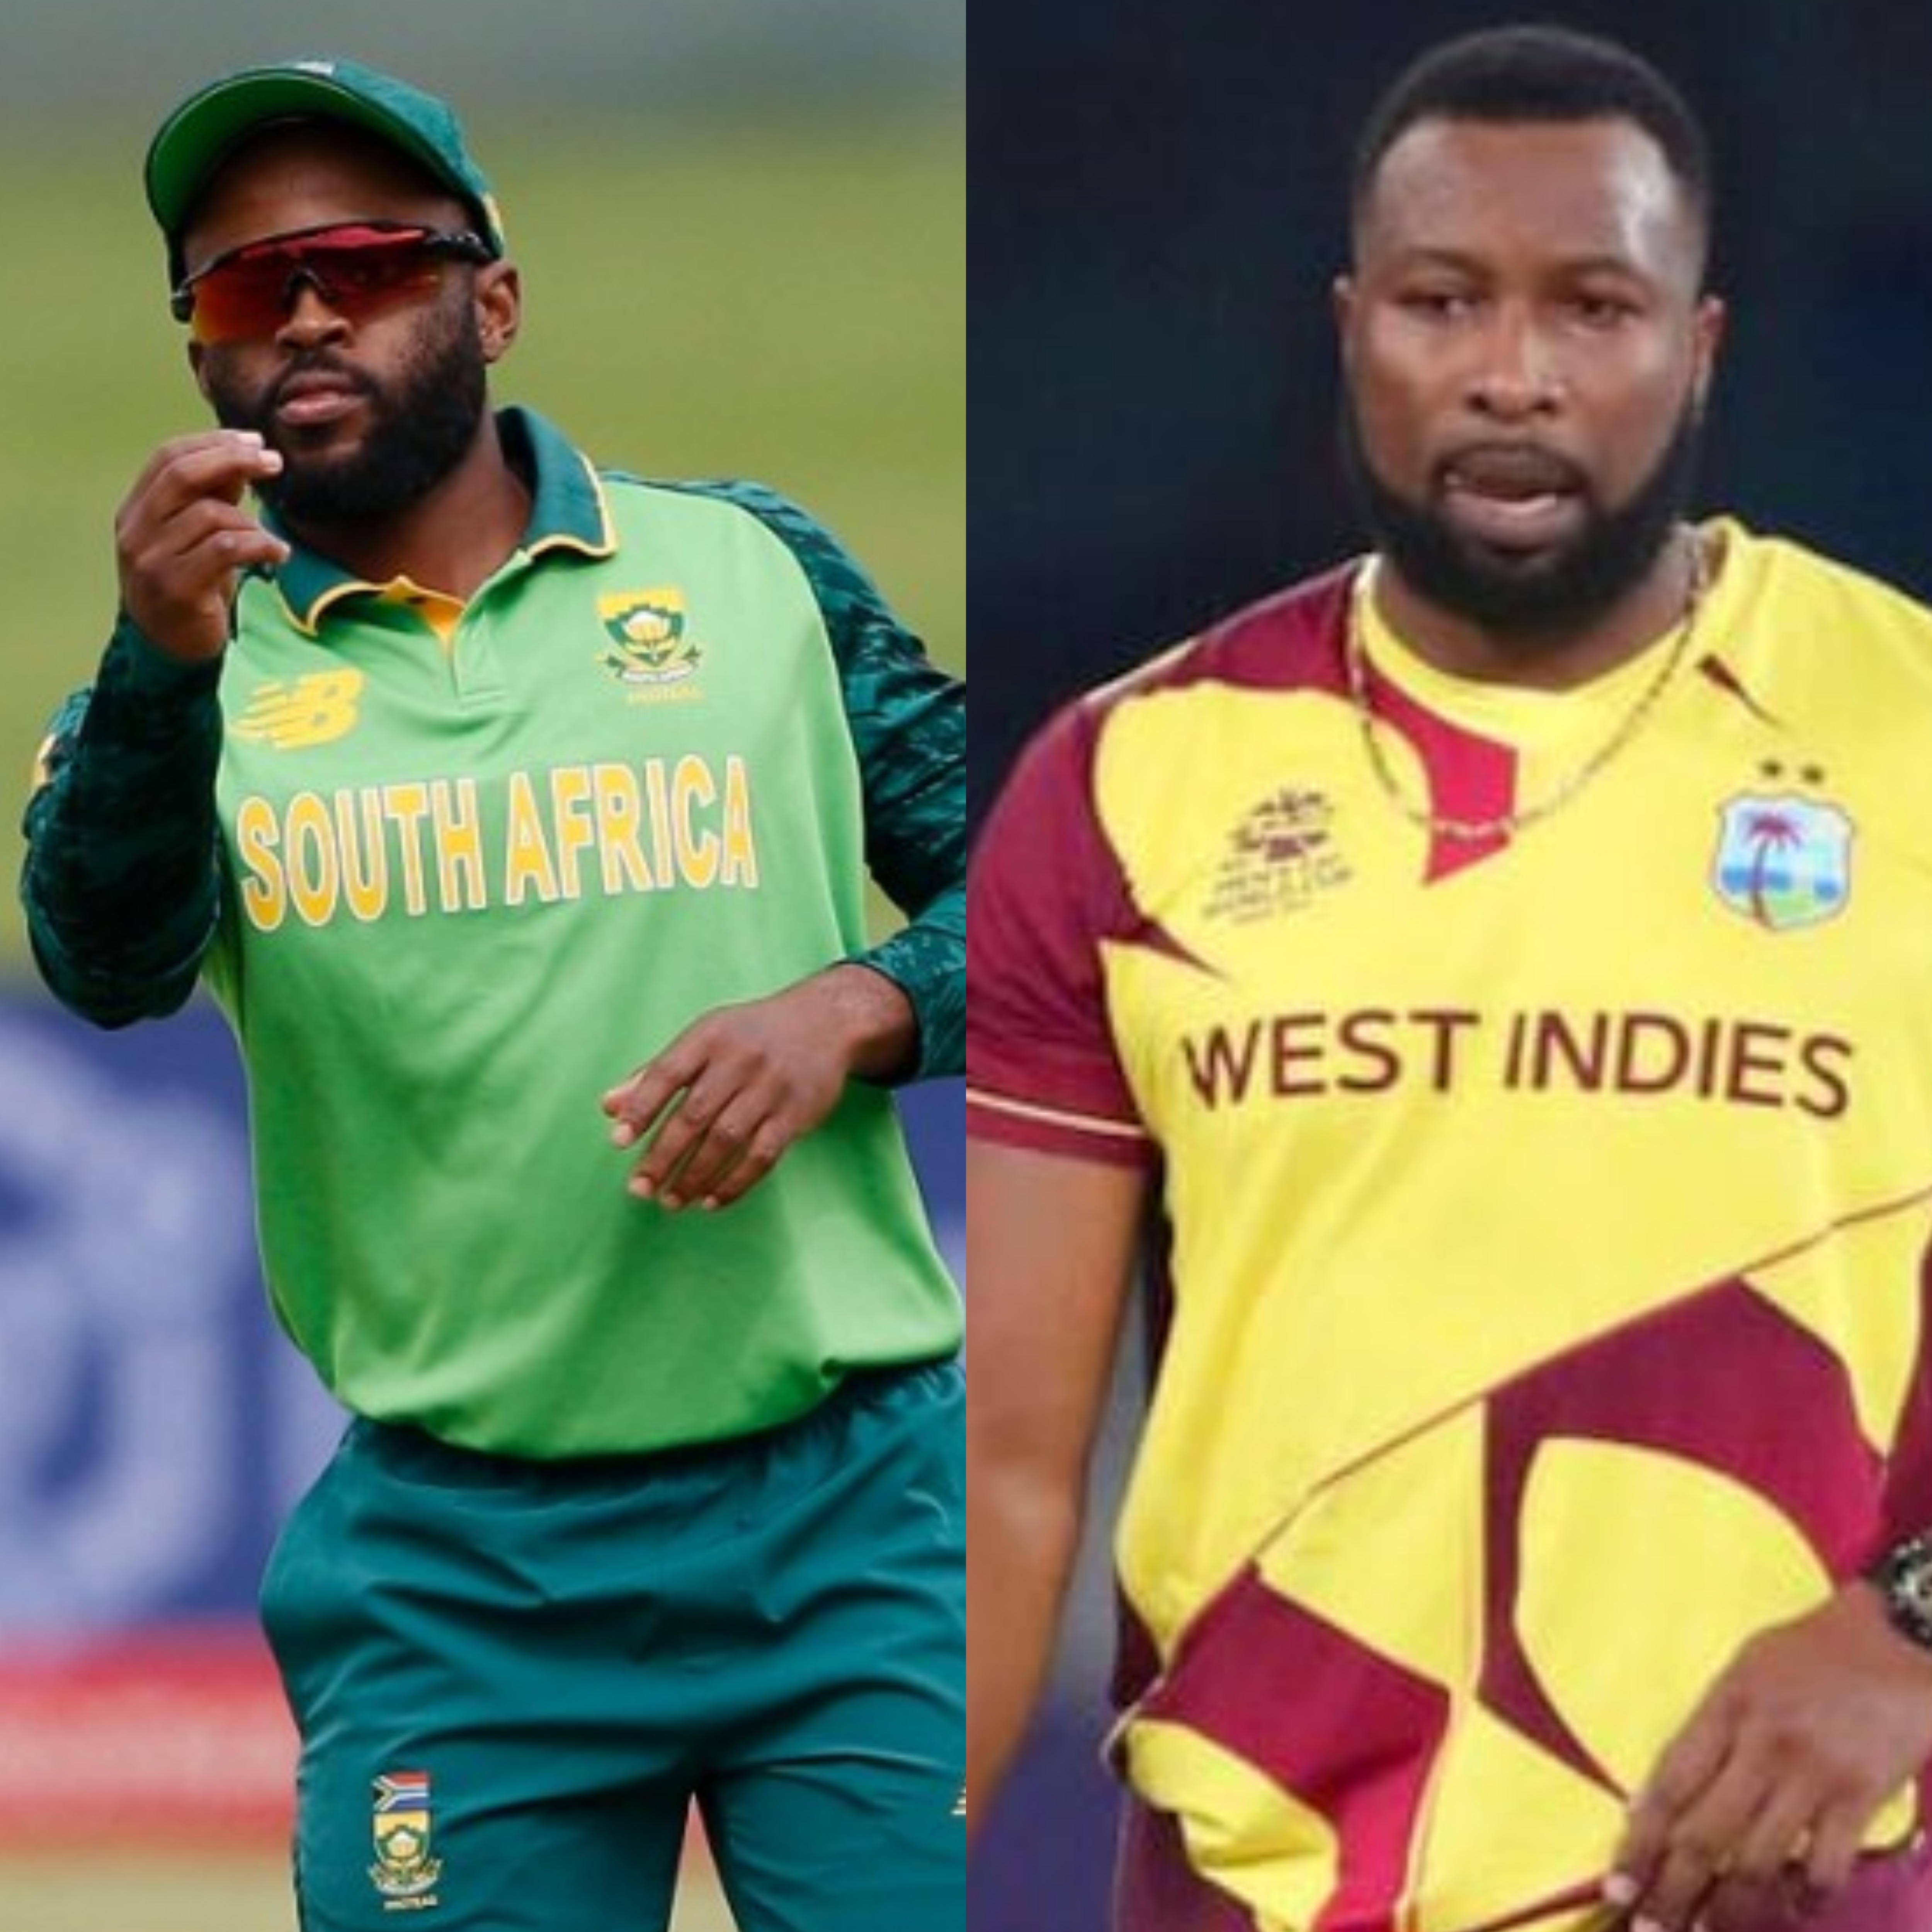 South Africa vs West Indies: Match Preview.